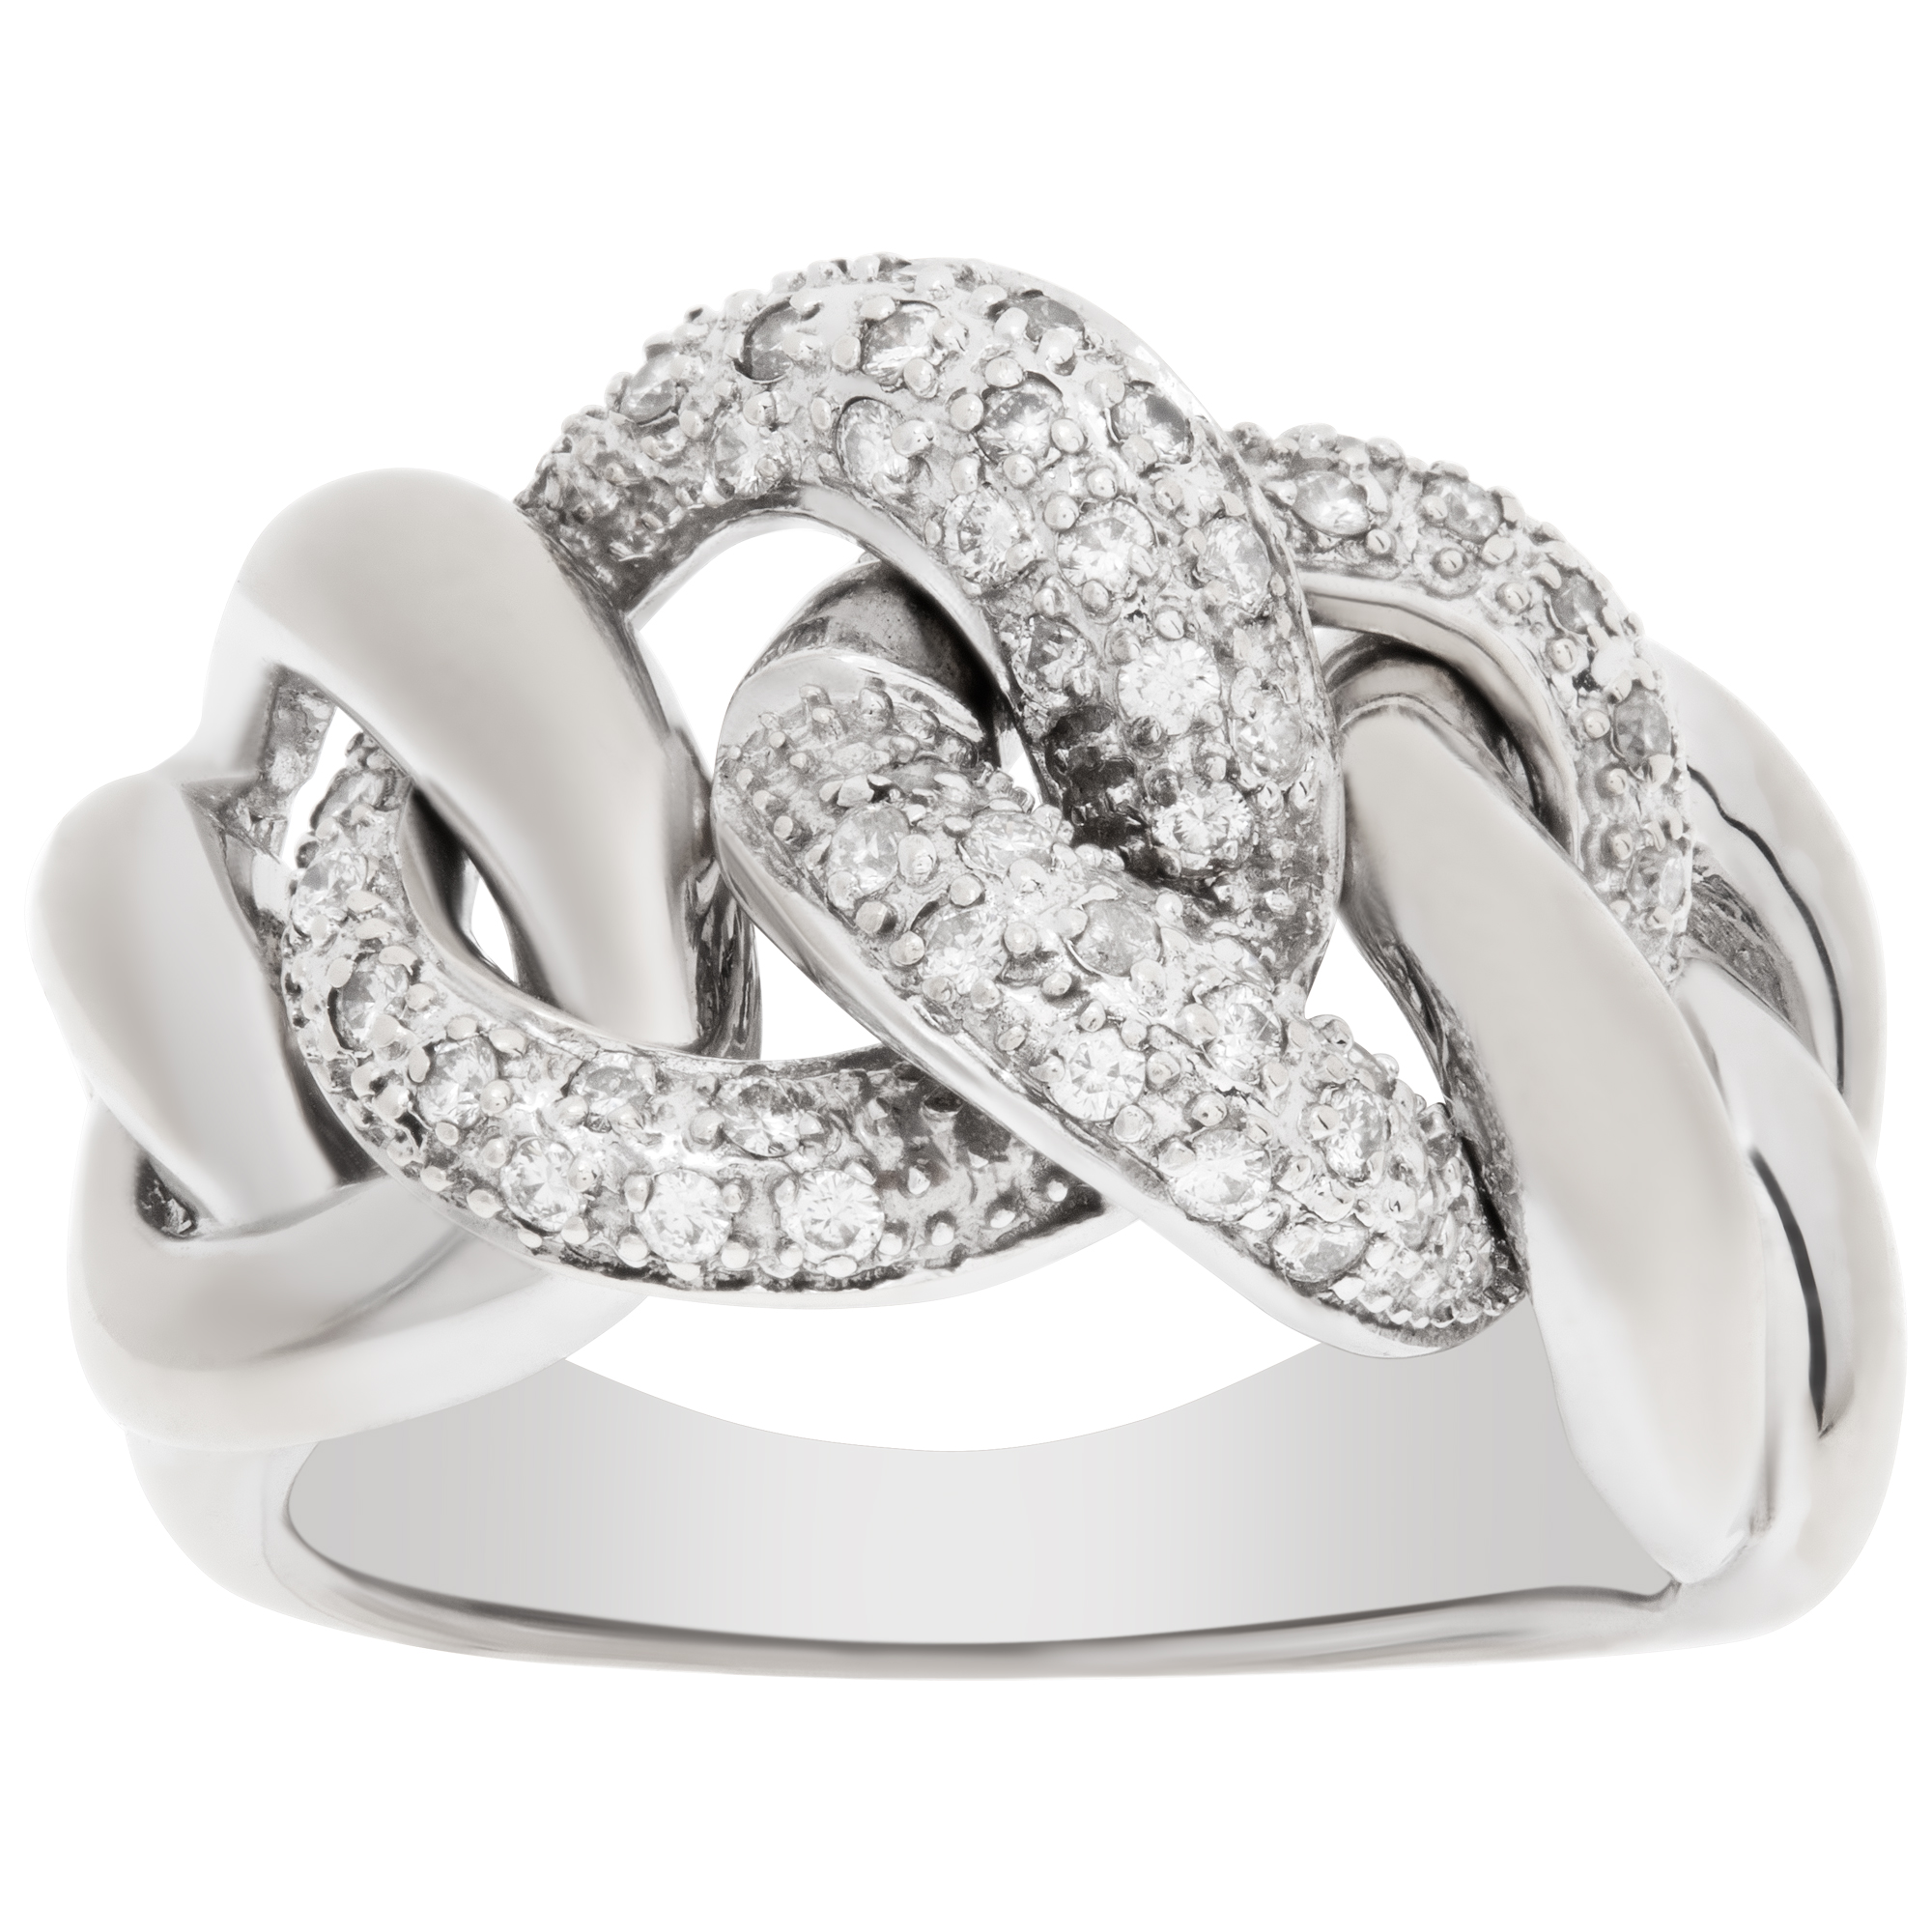 Pave Diamond link ring in 14k white gold. 0.50 carats in diamonds. Size 8 image 1